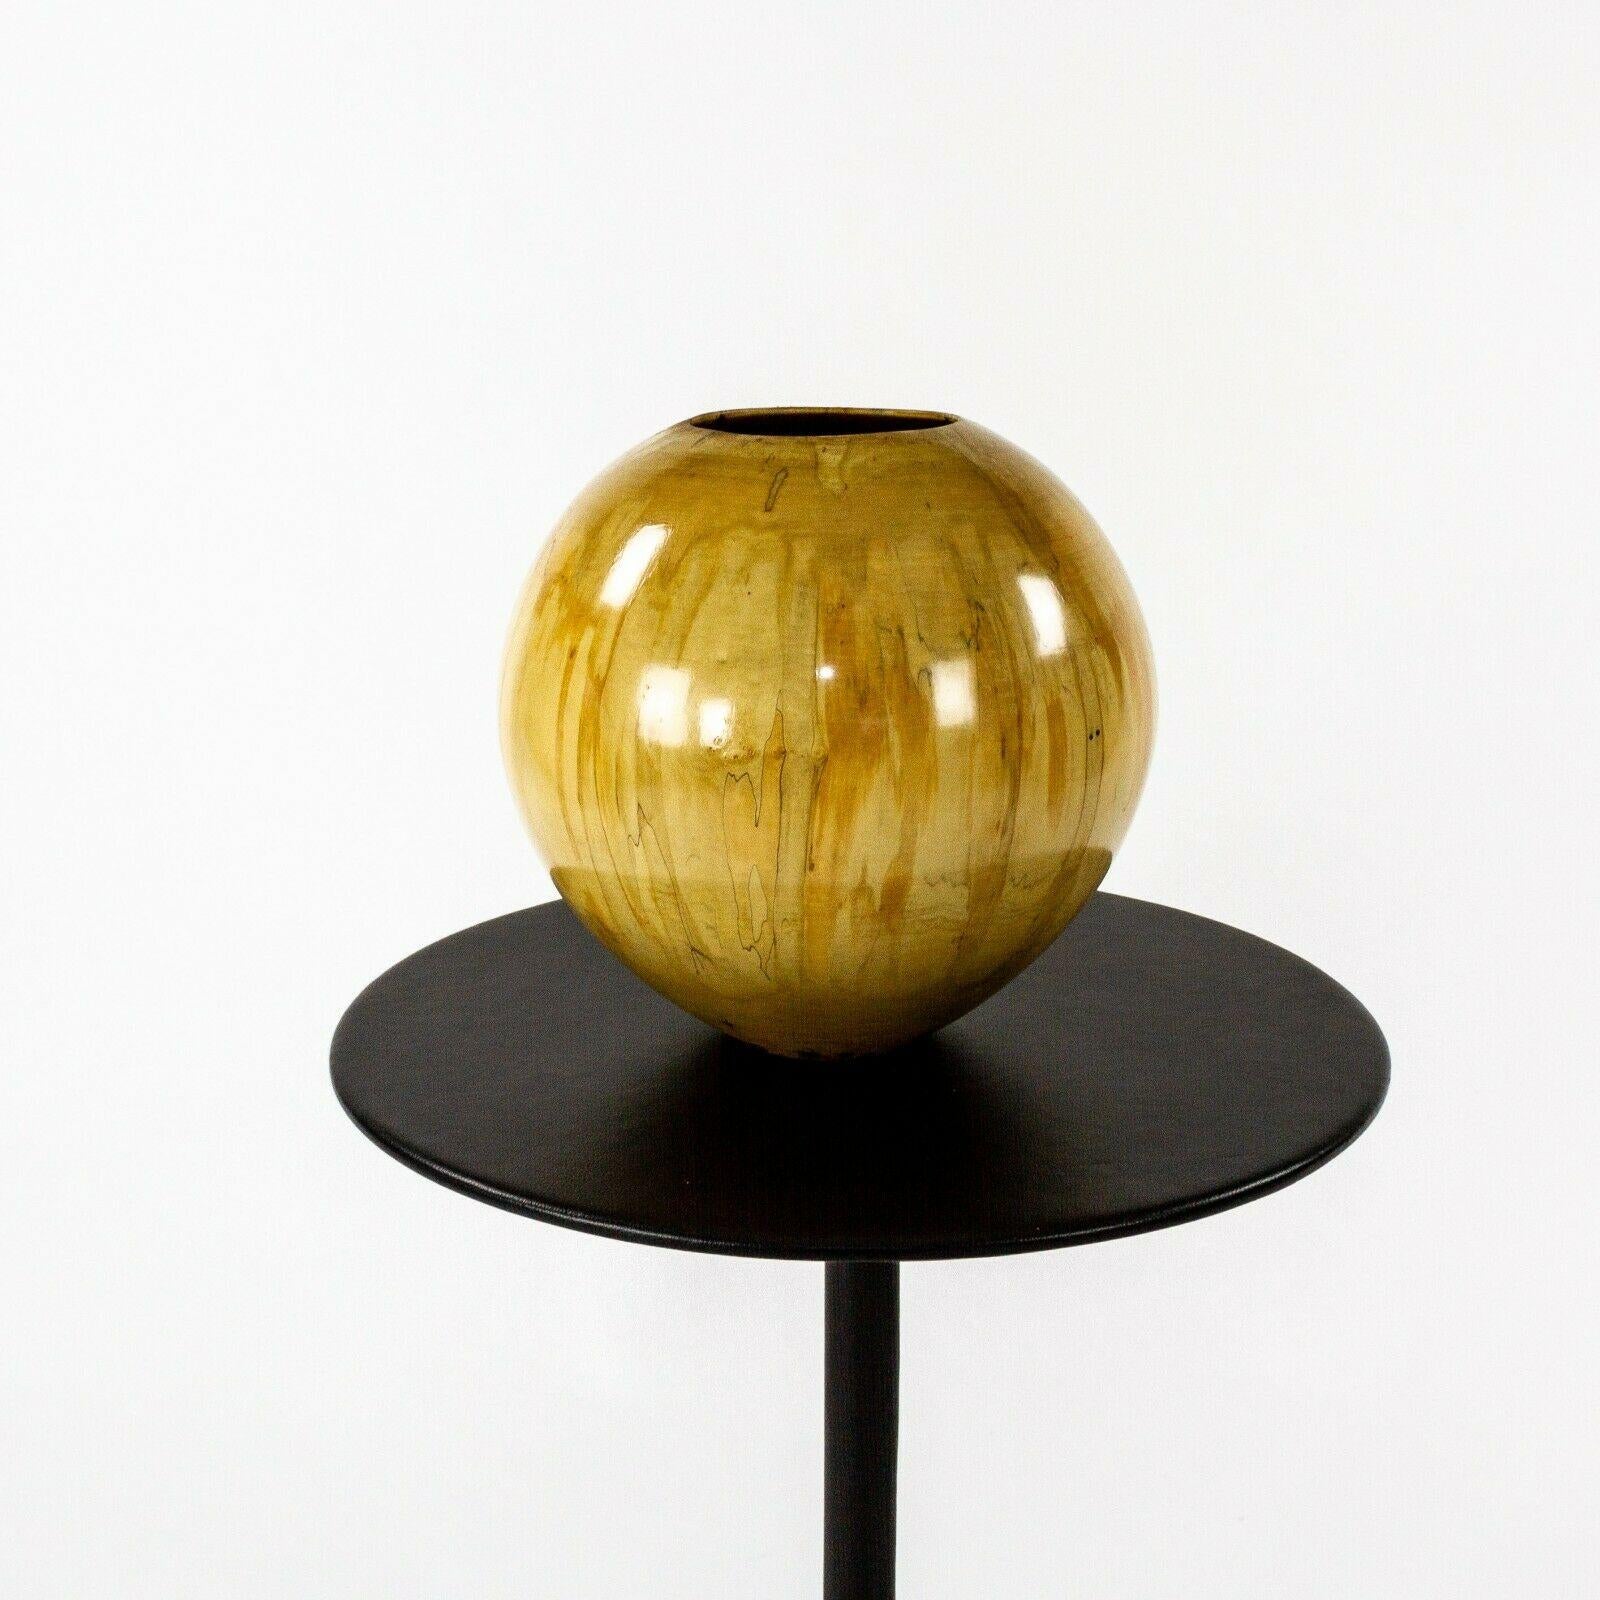 Listed for sale is a gorgeous ash leaf maple (also known as acer negundo) spherical turned wood bowl with high gloss finish, produced by renowned woodworker Philip Moulthrop. The piece came from a Pittsburgh, Pennsylvania estate along with a number